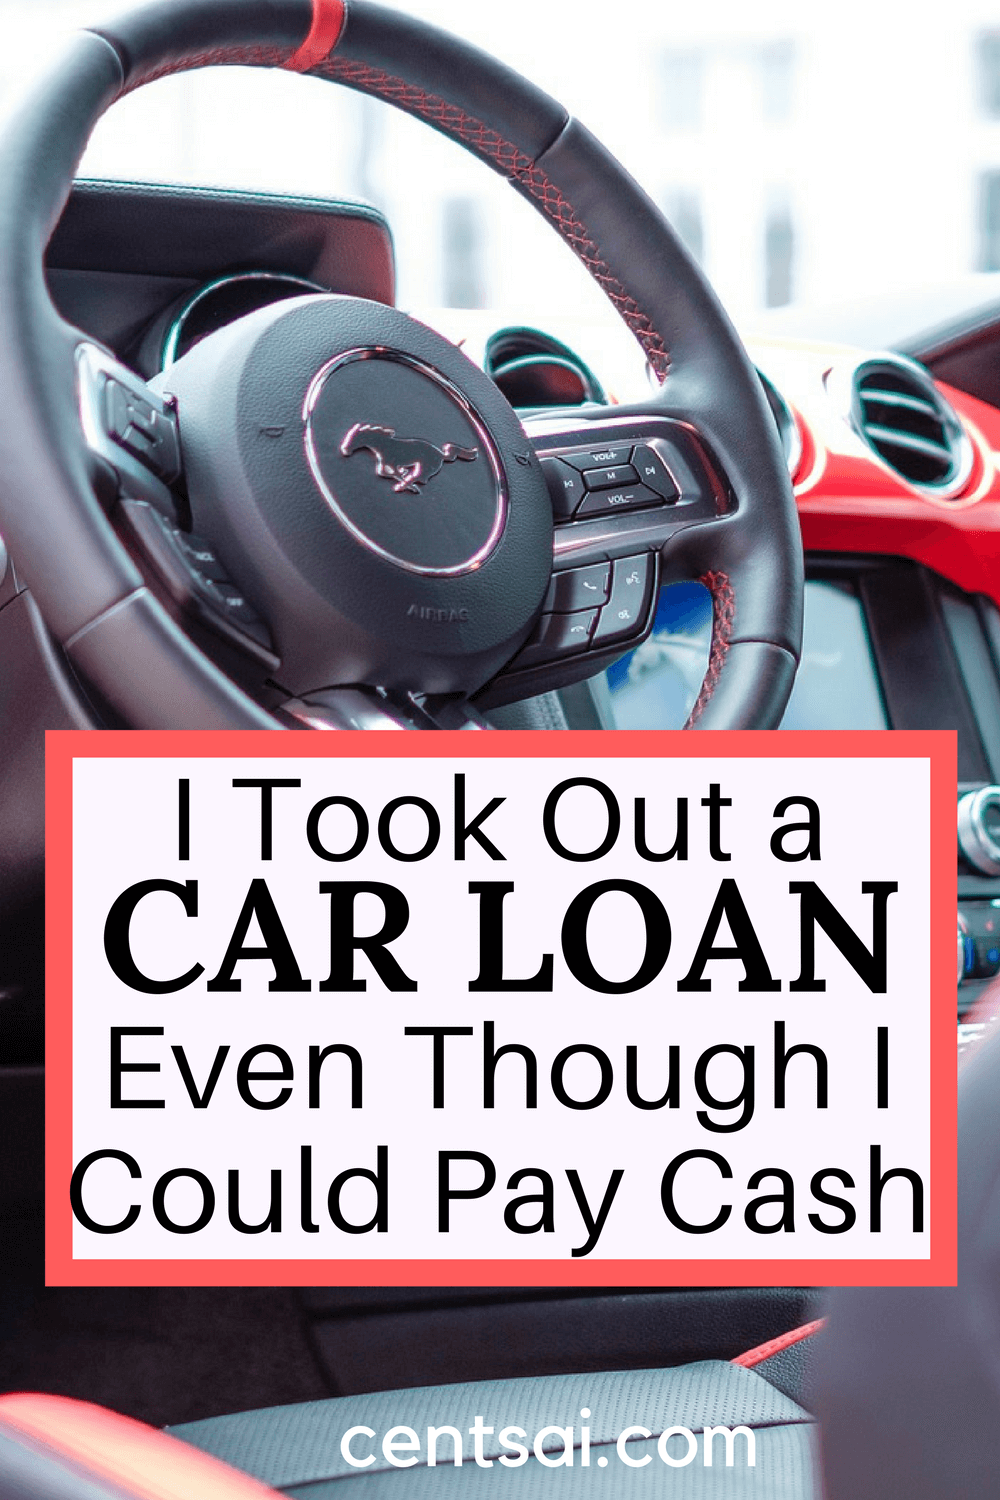 Debt isn't always a bad thing, if you're responsible. I used a car loan even though I didn't need to so that I could build my credit score.